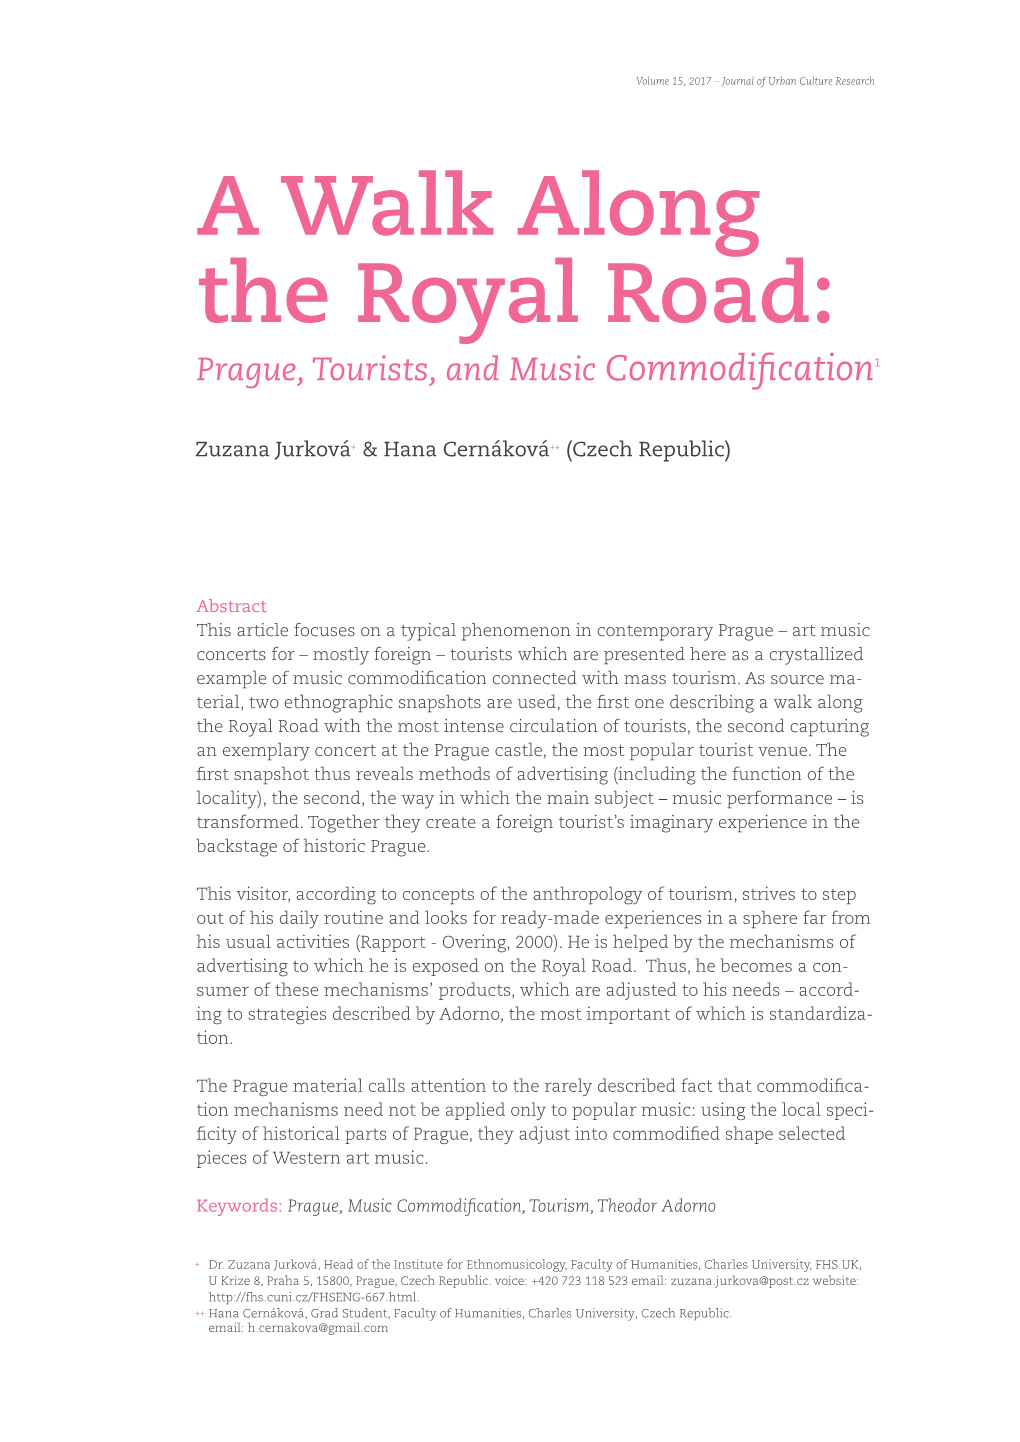 A Walk Along the Royal Road: Prague, Tourists, and Music Commodification1